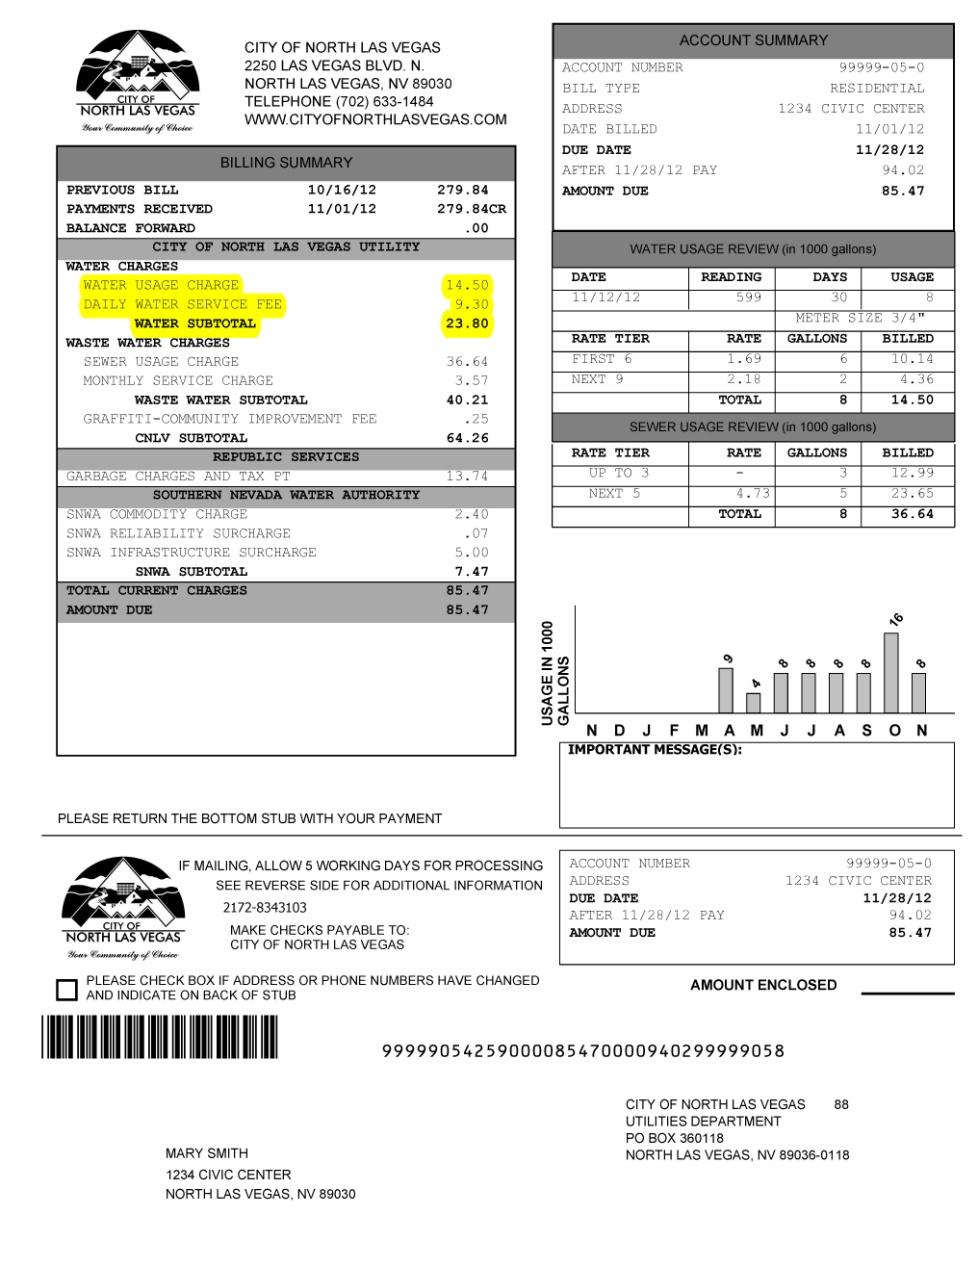 CITY OF NORTH LAS VEGAS Utilities Department City of North Las Vegas Potable Water Volume Charge (Residential Metered Charges) Residential customers are charged for water usage via a four-tiered